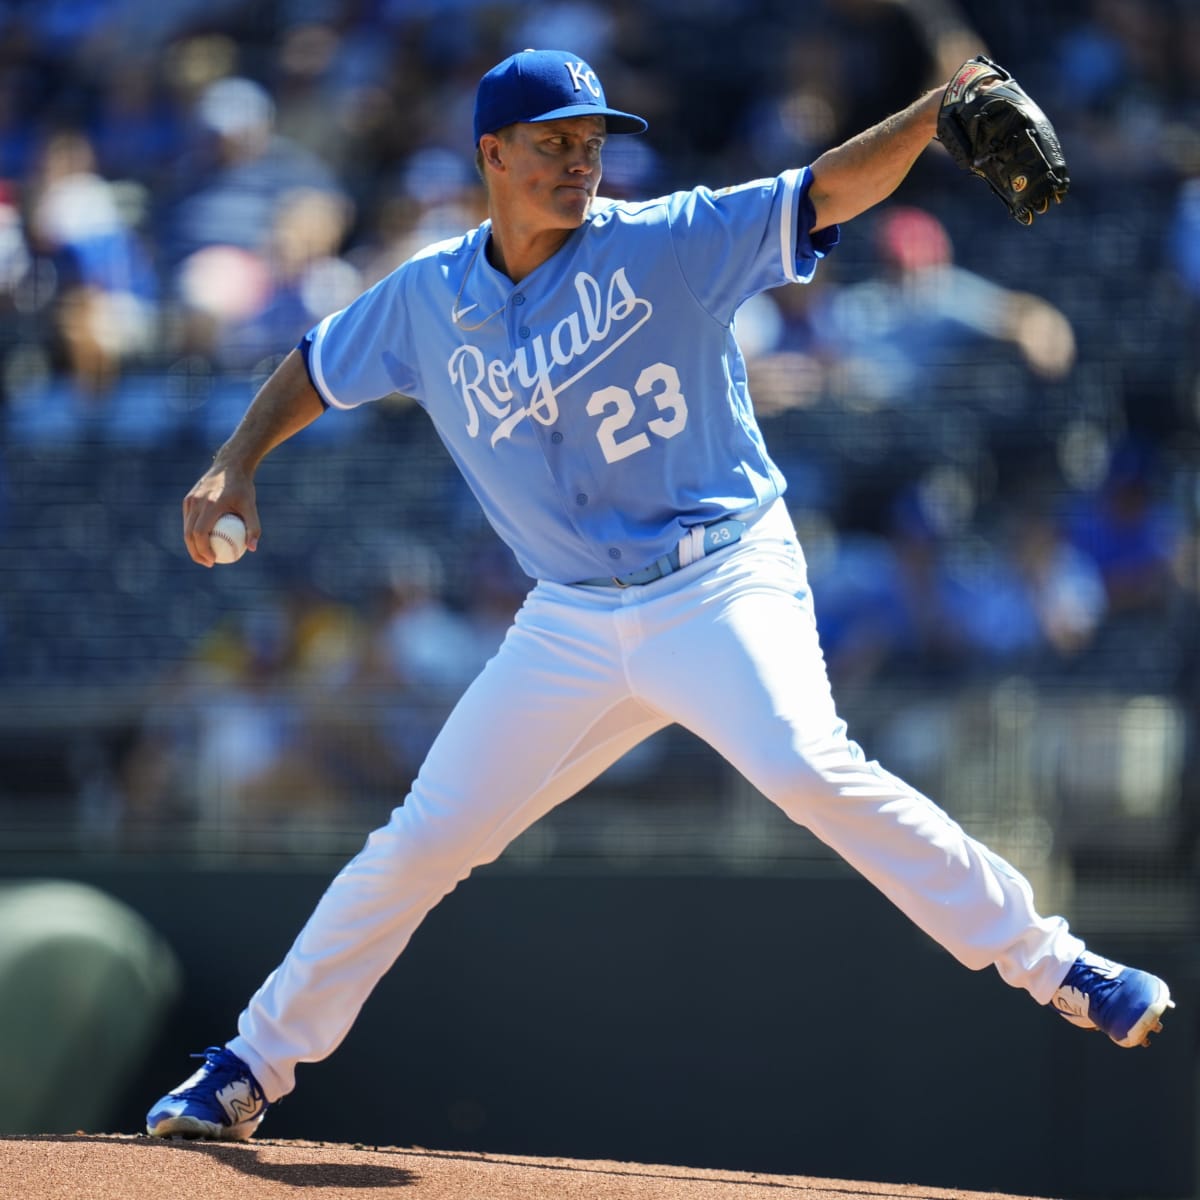 Royals' Zack Greinke pitched a win in what could be his career finale